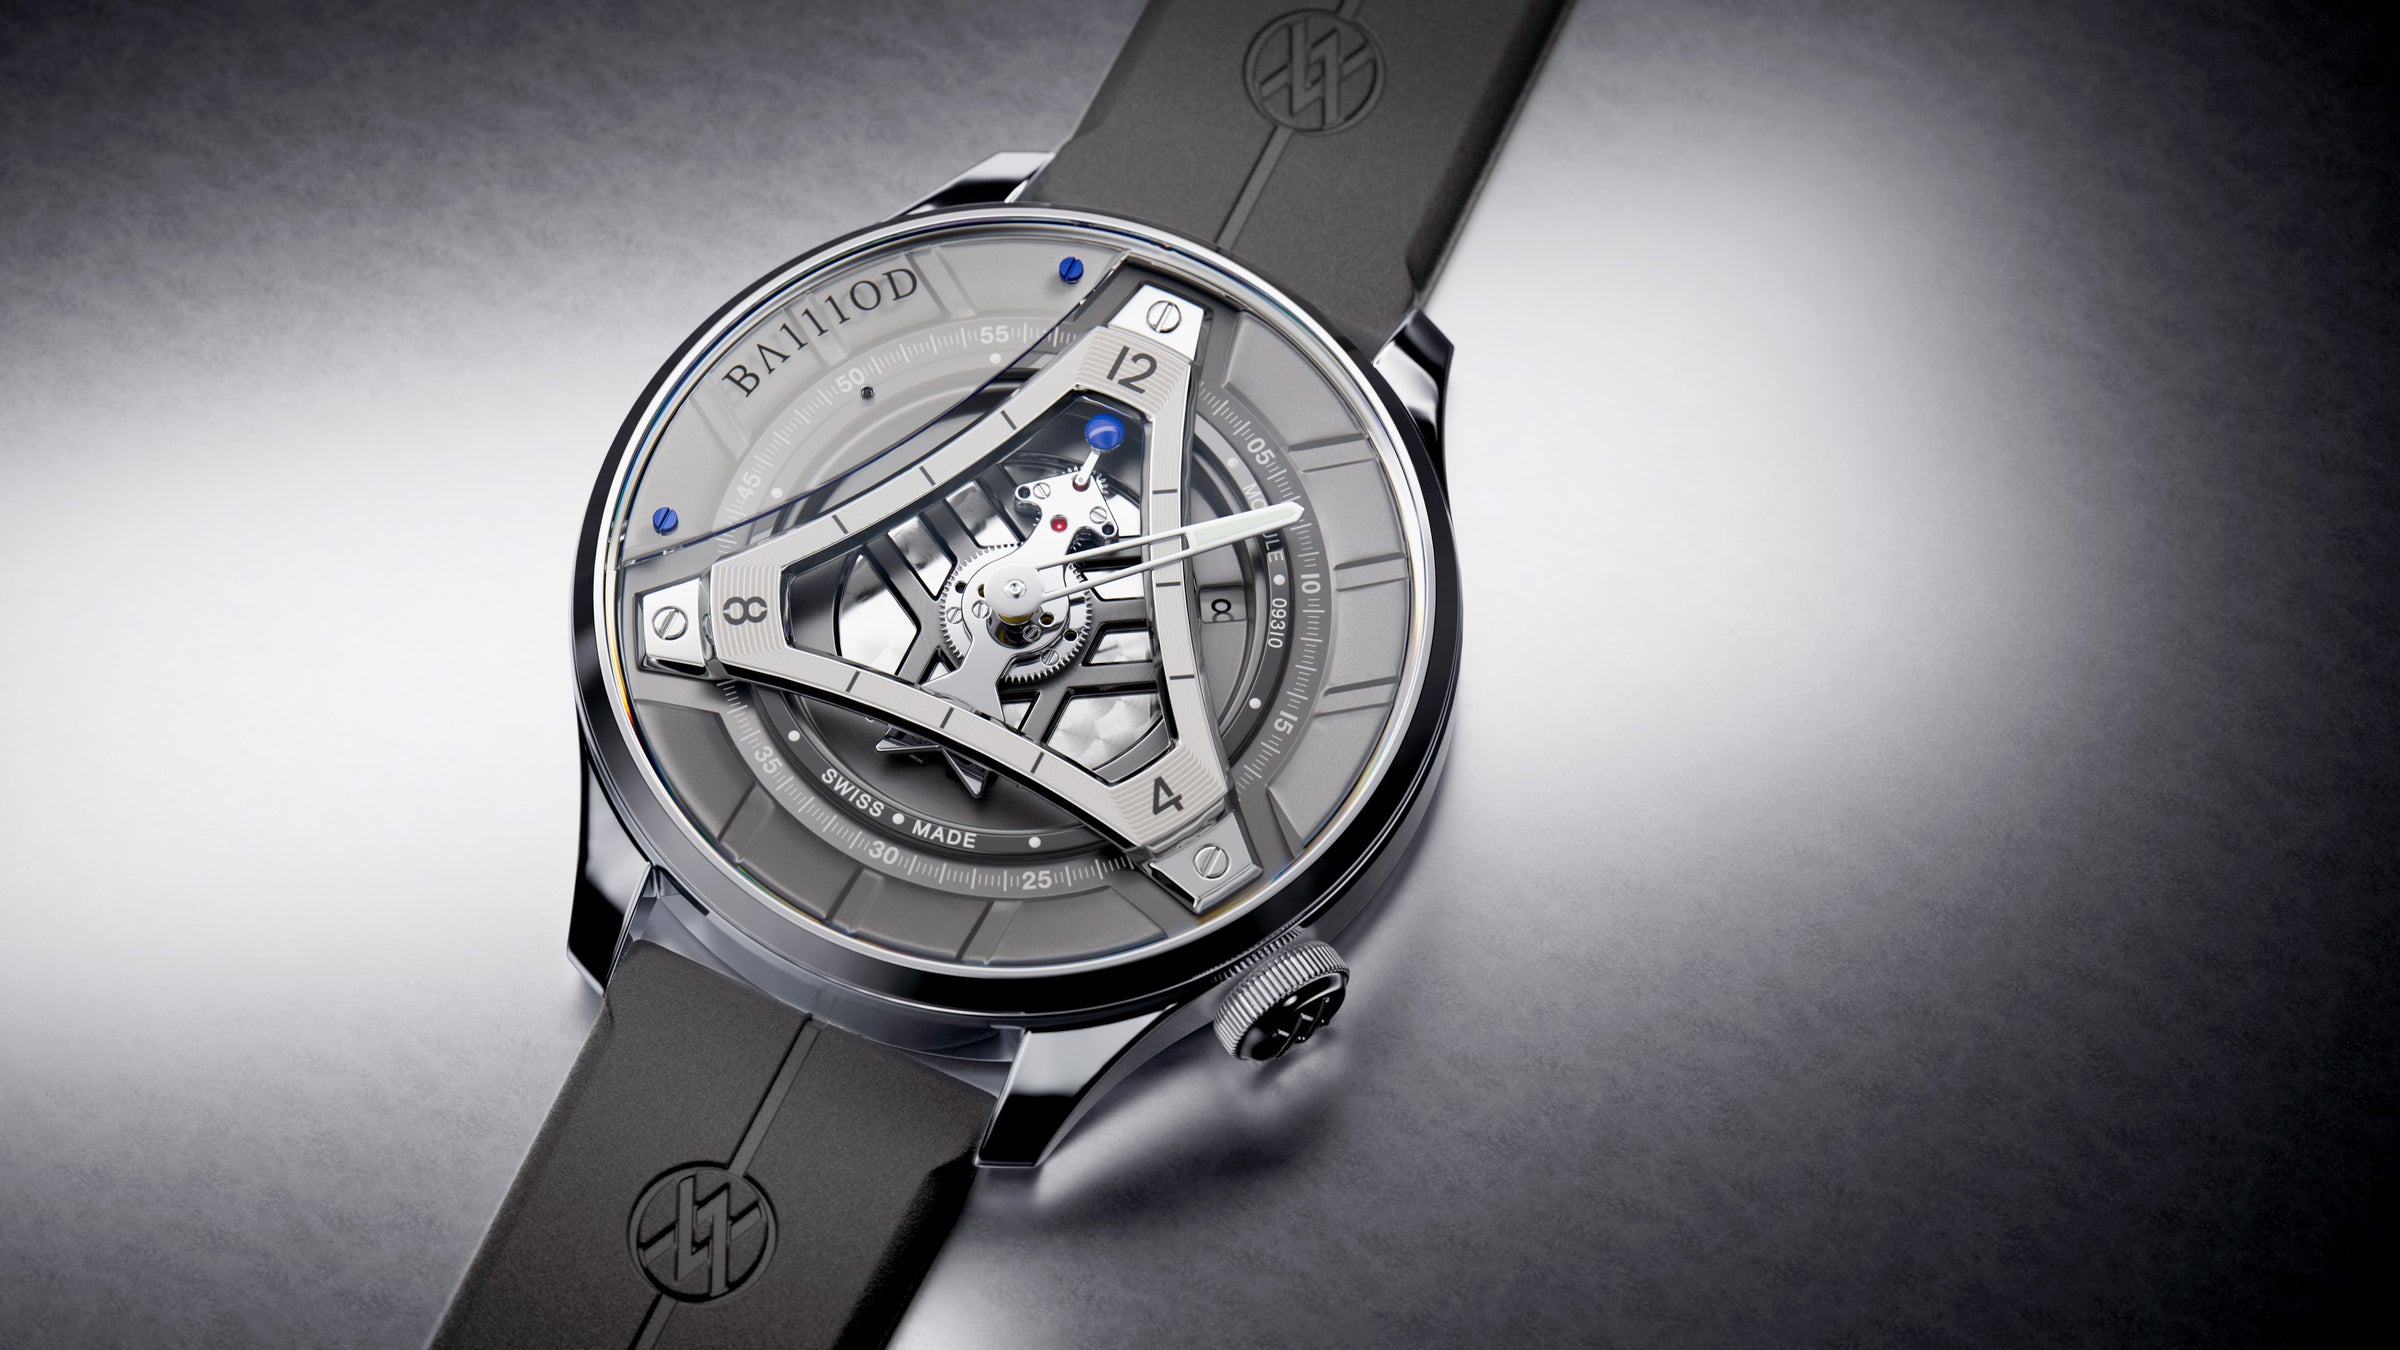 CHPTR_Δ Concept watch grey and blue Swiss Made